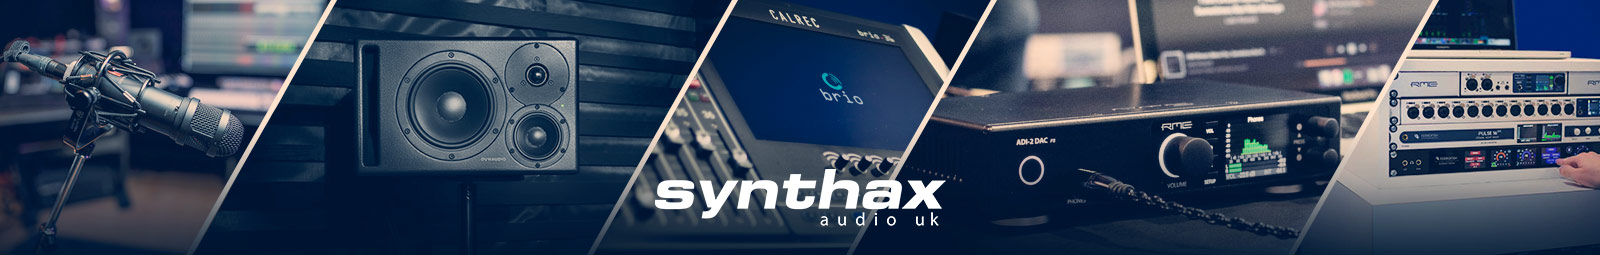 Pro audio collage by Synthax Audio UK